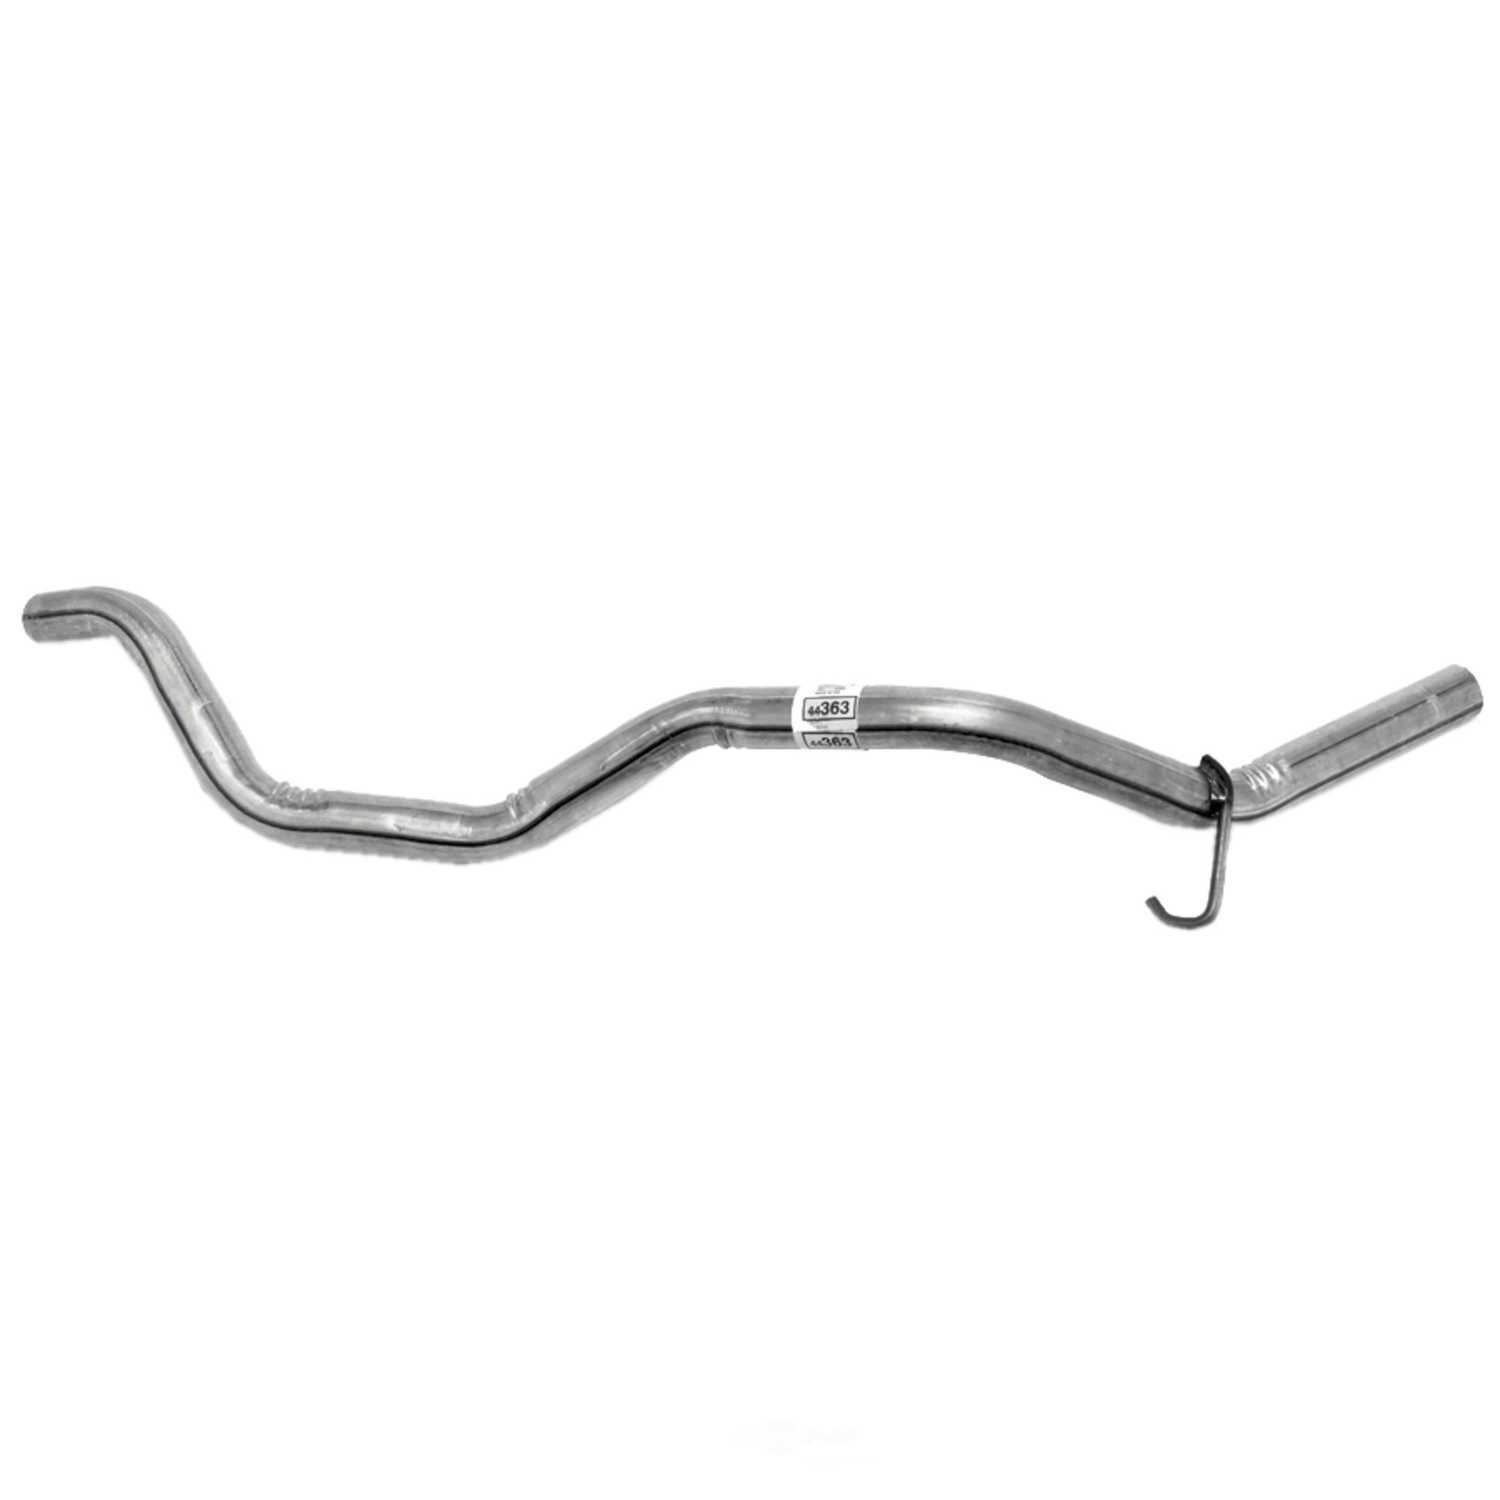 WALKER - Exhaust Tail Pipe - WAL 44363